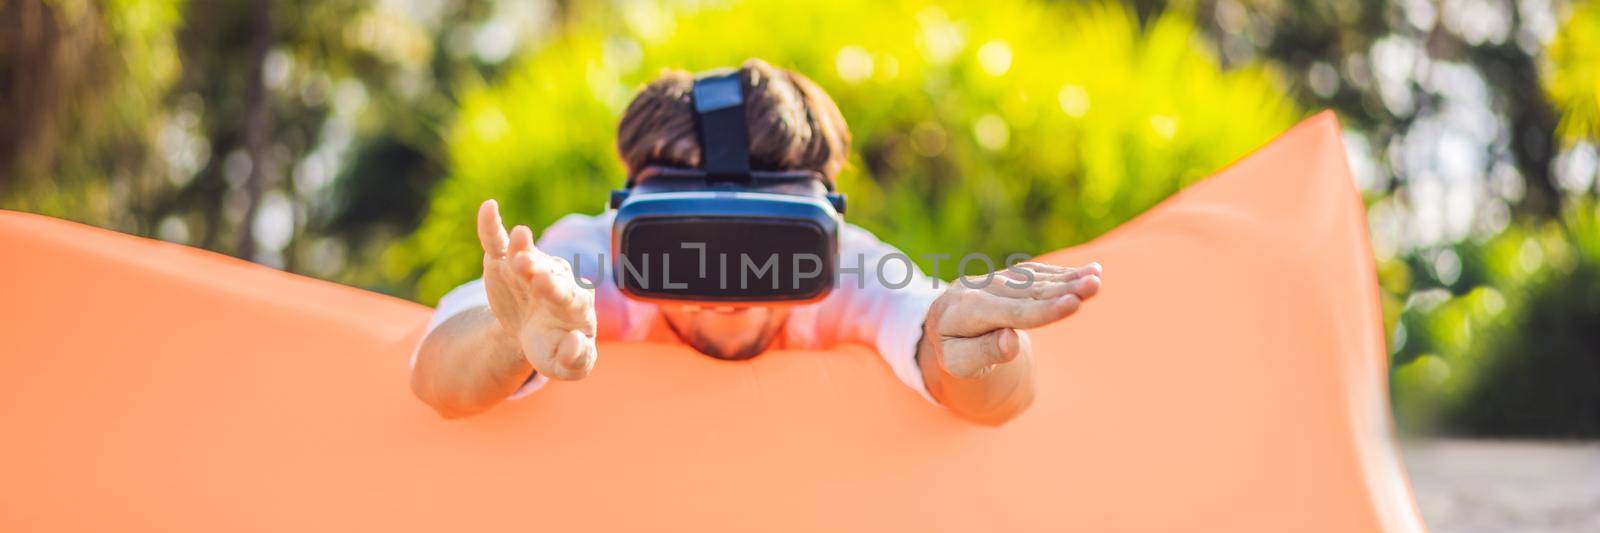 BANNER, LONG FORMAT Summer lifestyle portrait of man sitting on the orange inflatable sofa and uses virtual reality headset on the beach of tropical island. Relaxing and enjoying life on air bed by galitskaya